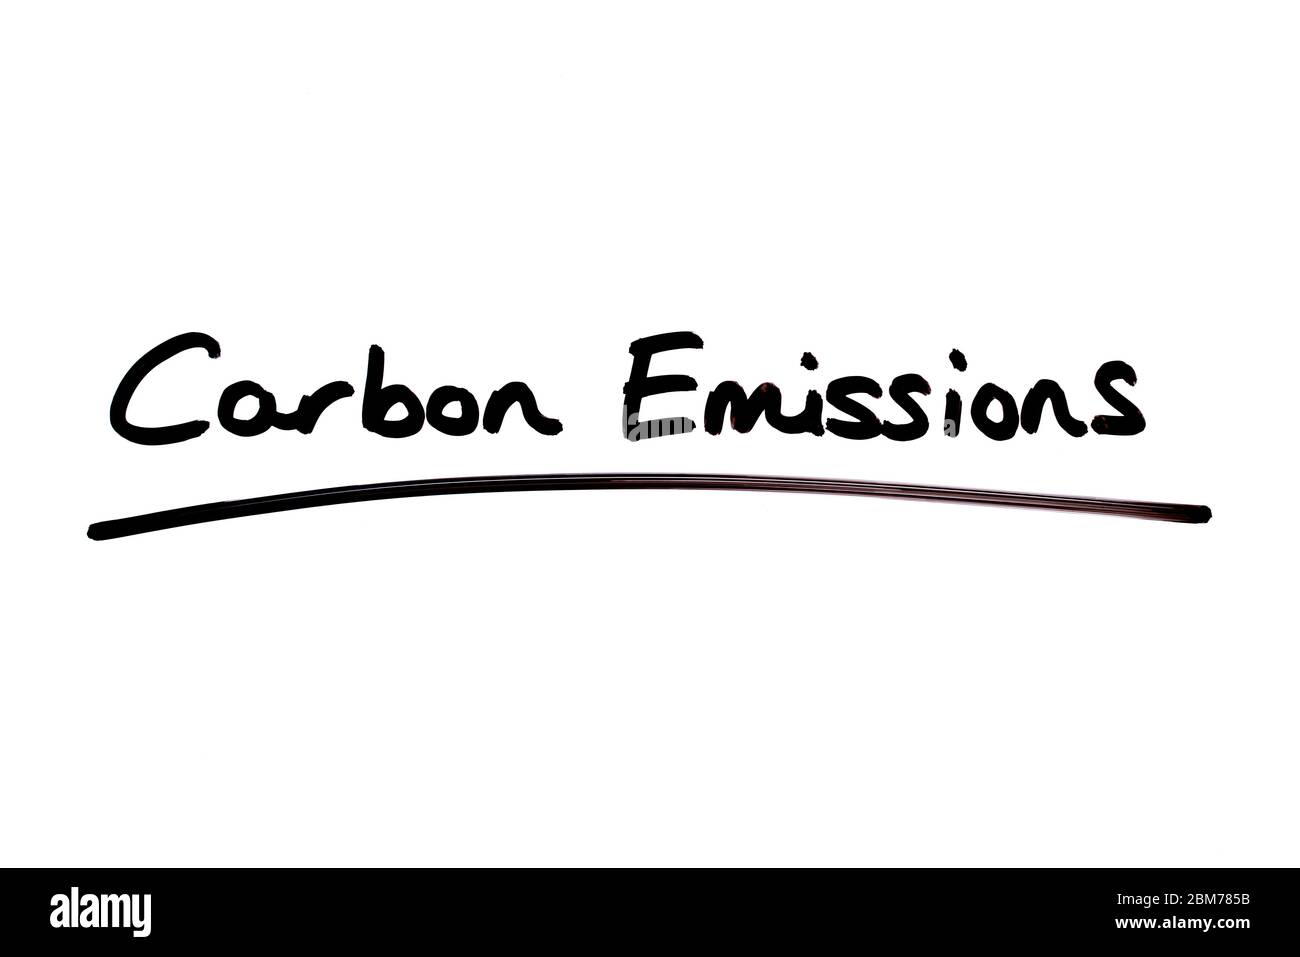 Carbon Emissions handwritten on a white background. Stock Photo